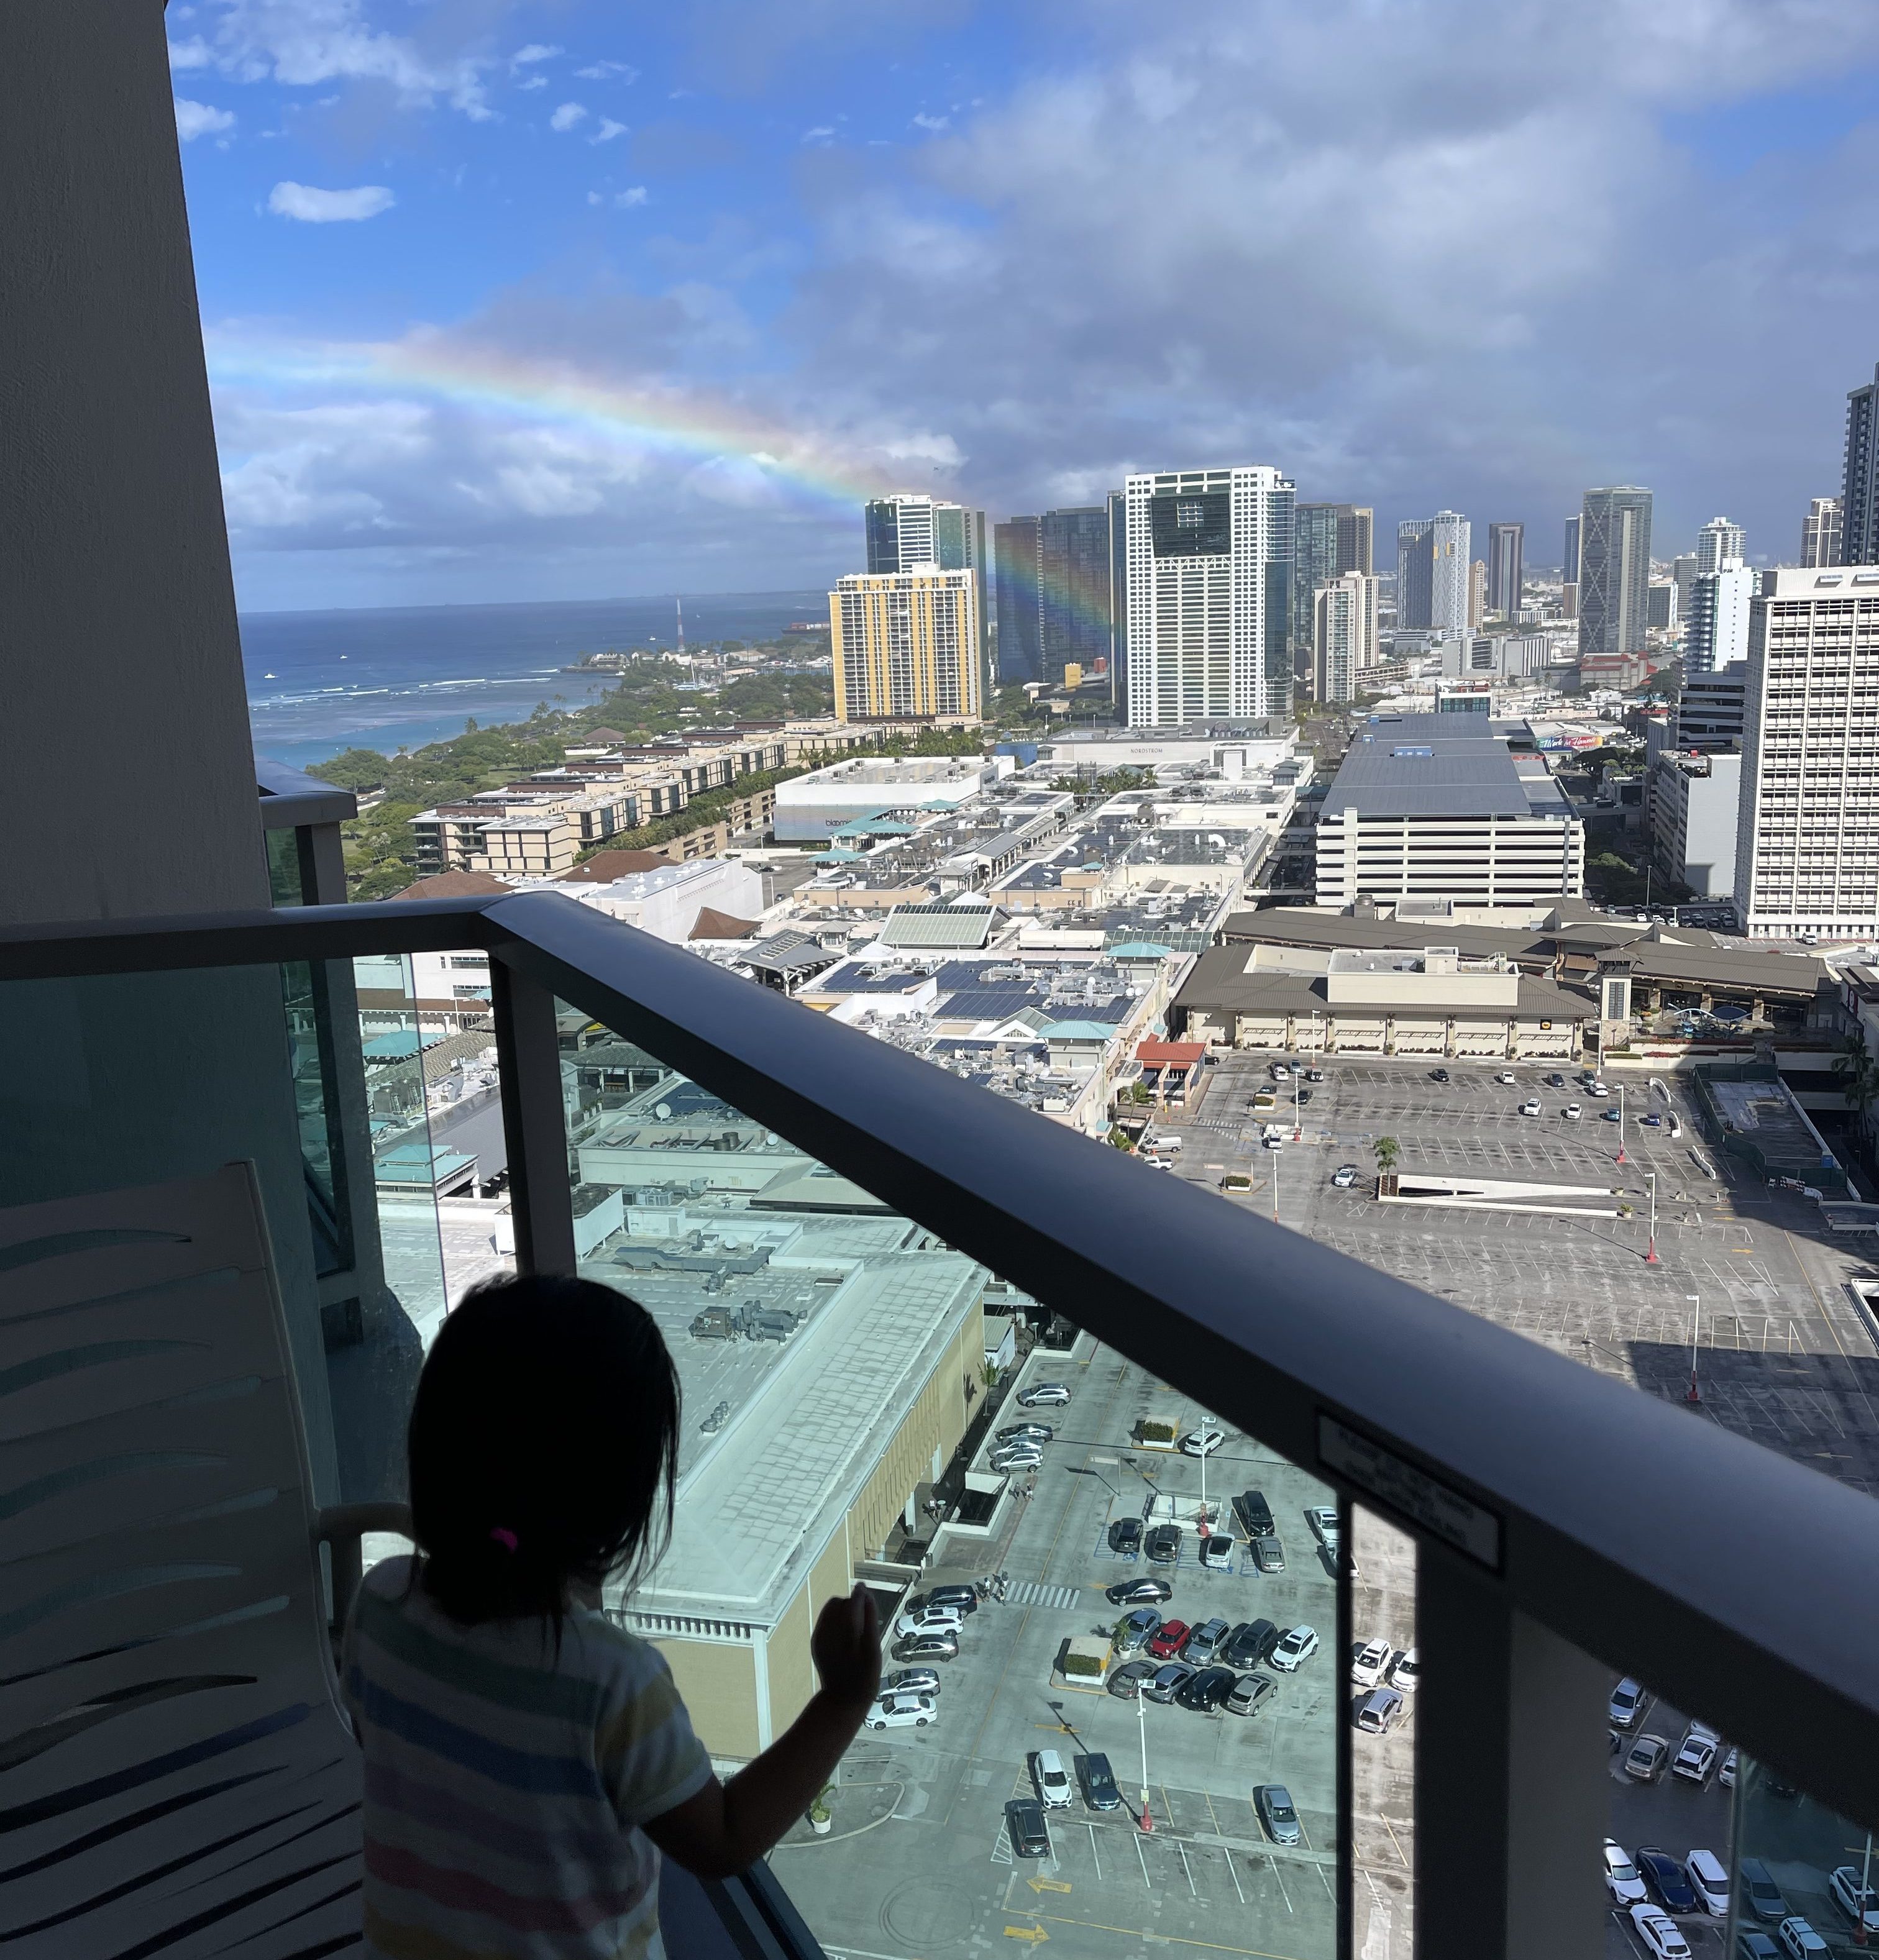 A child looks out of a glass-walled balcony to look at a rainbow that hangs above the buildings of Ala Moana.